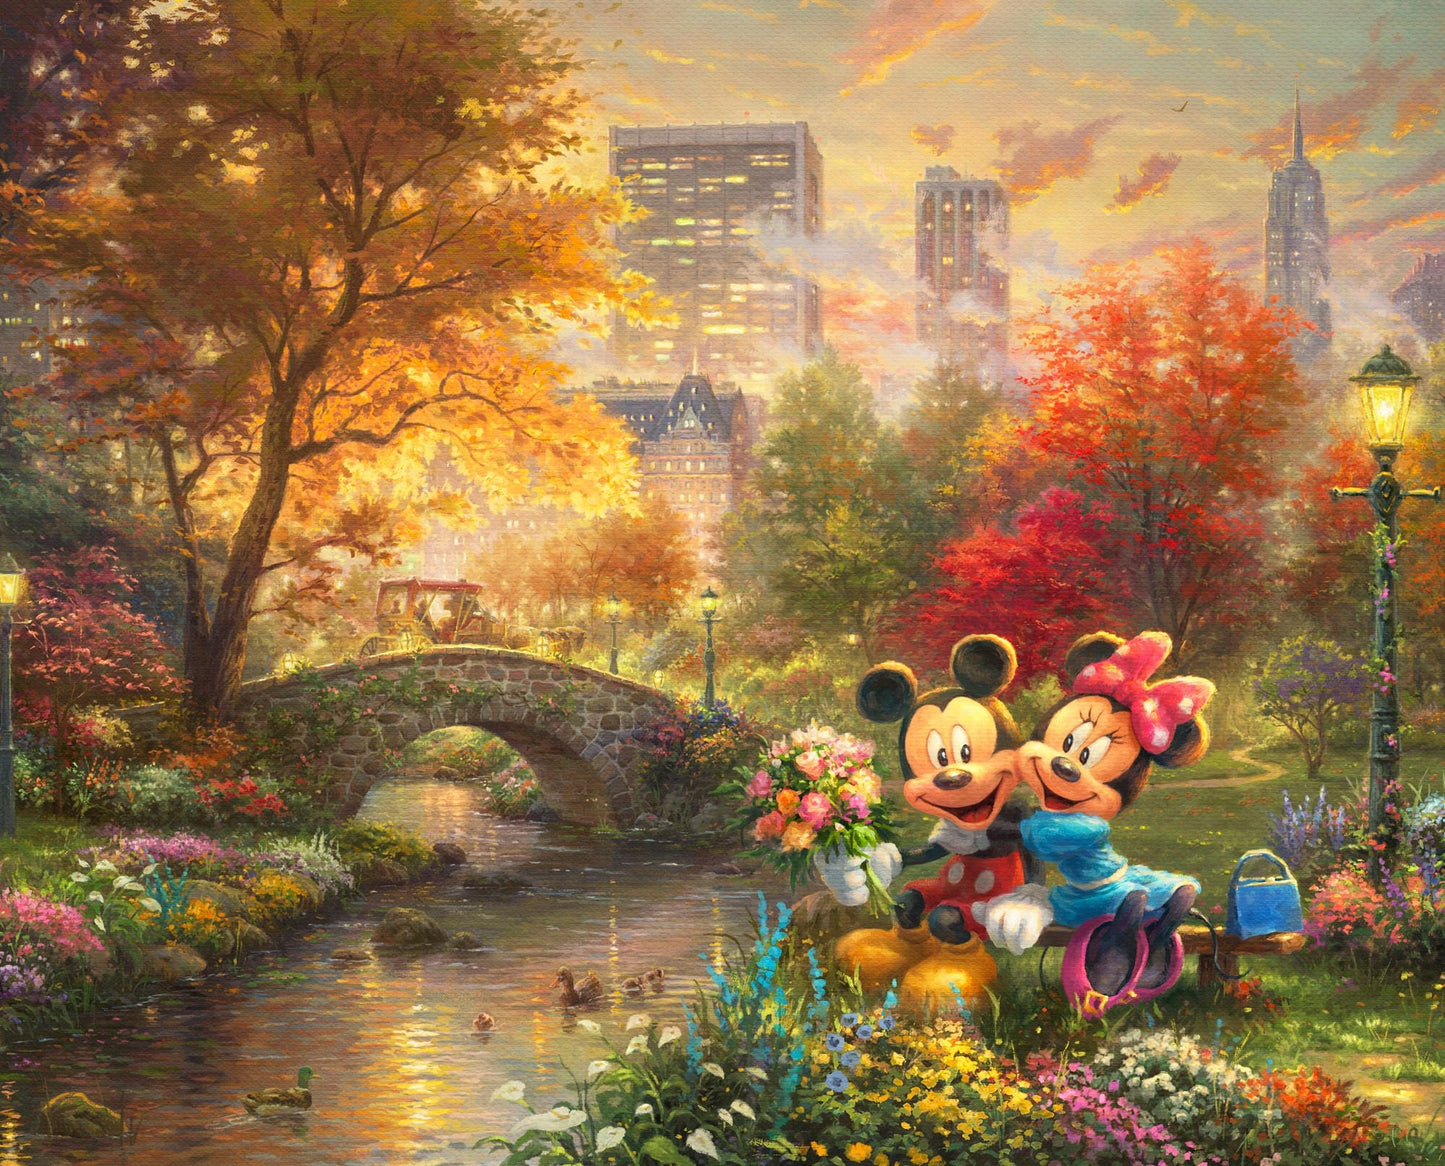 Disney Dreams Collection by Thomas Kinkade Studios 36" Panel Sweetheart Central Park DS-2024-9C Cotton Woven Panel